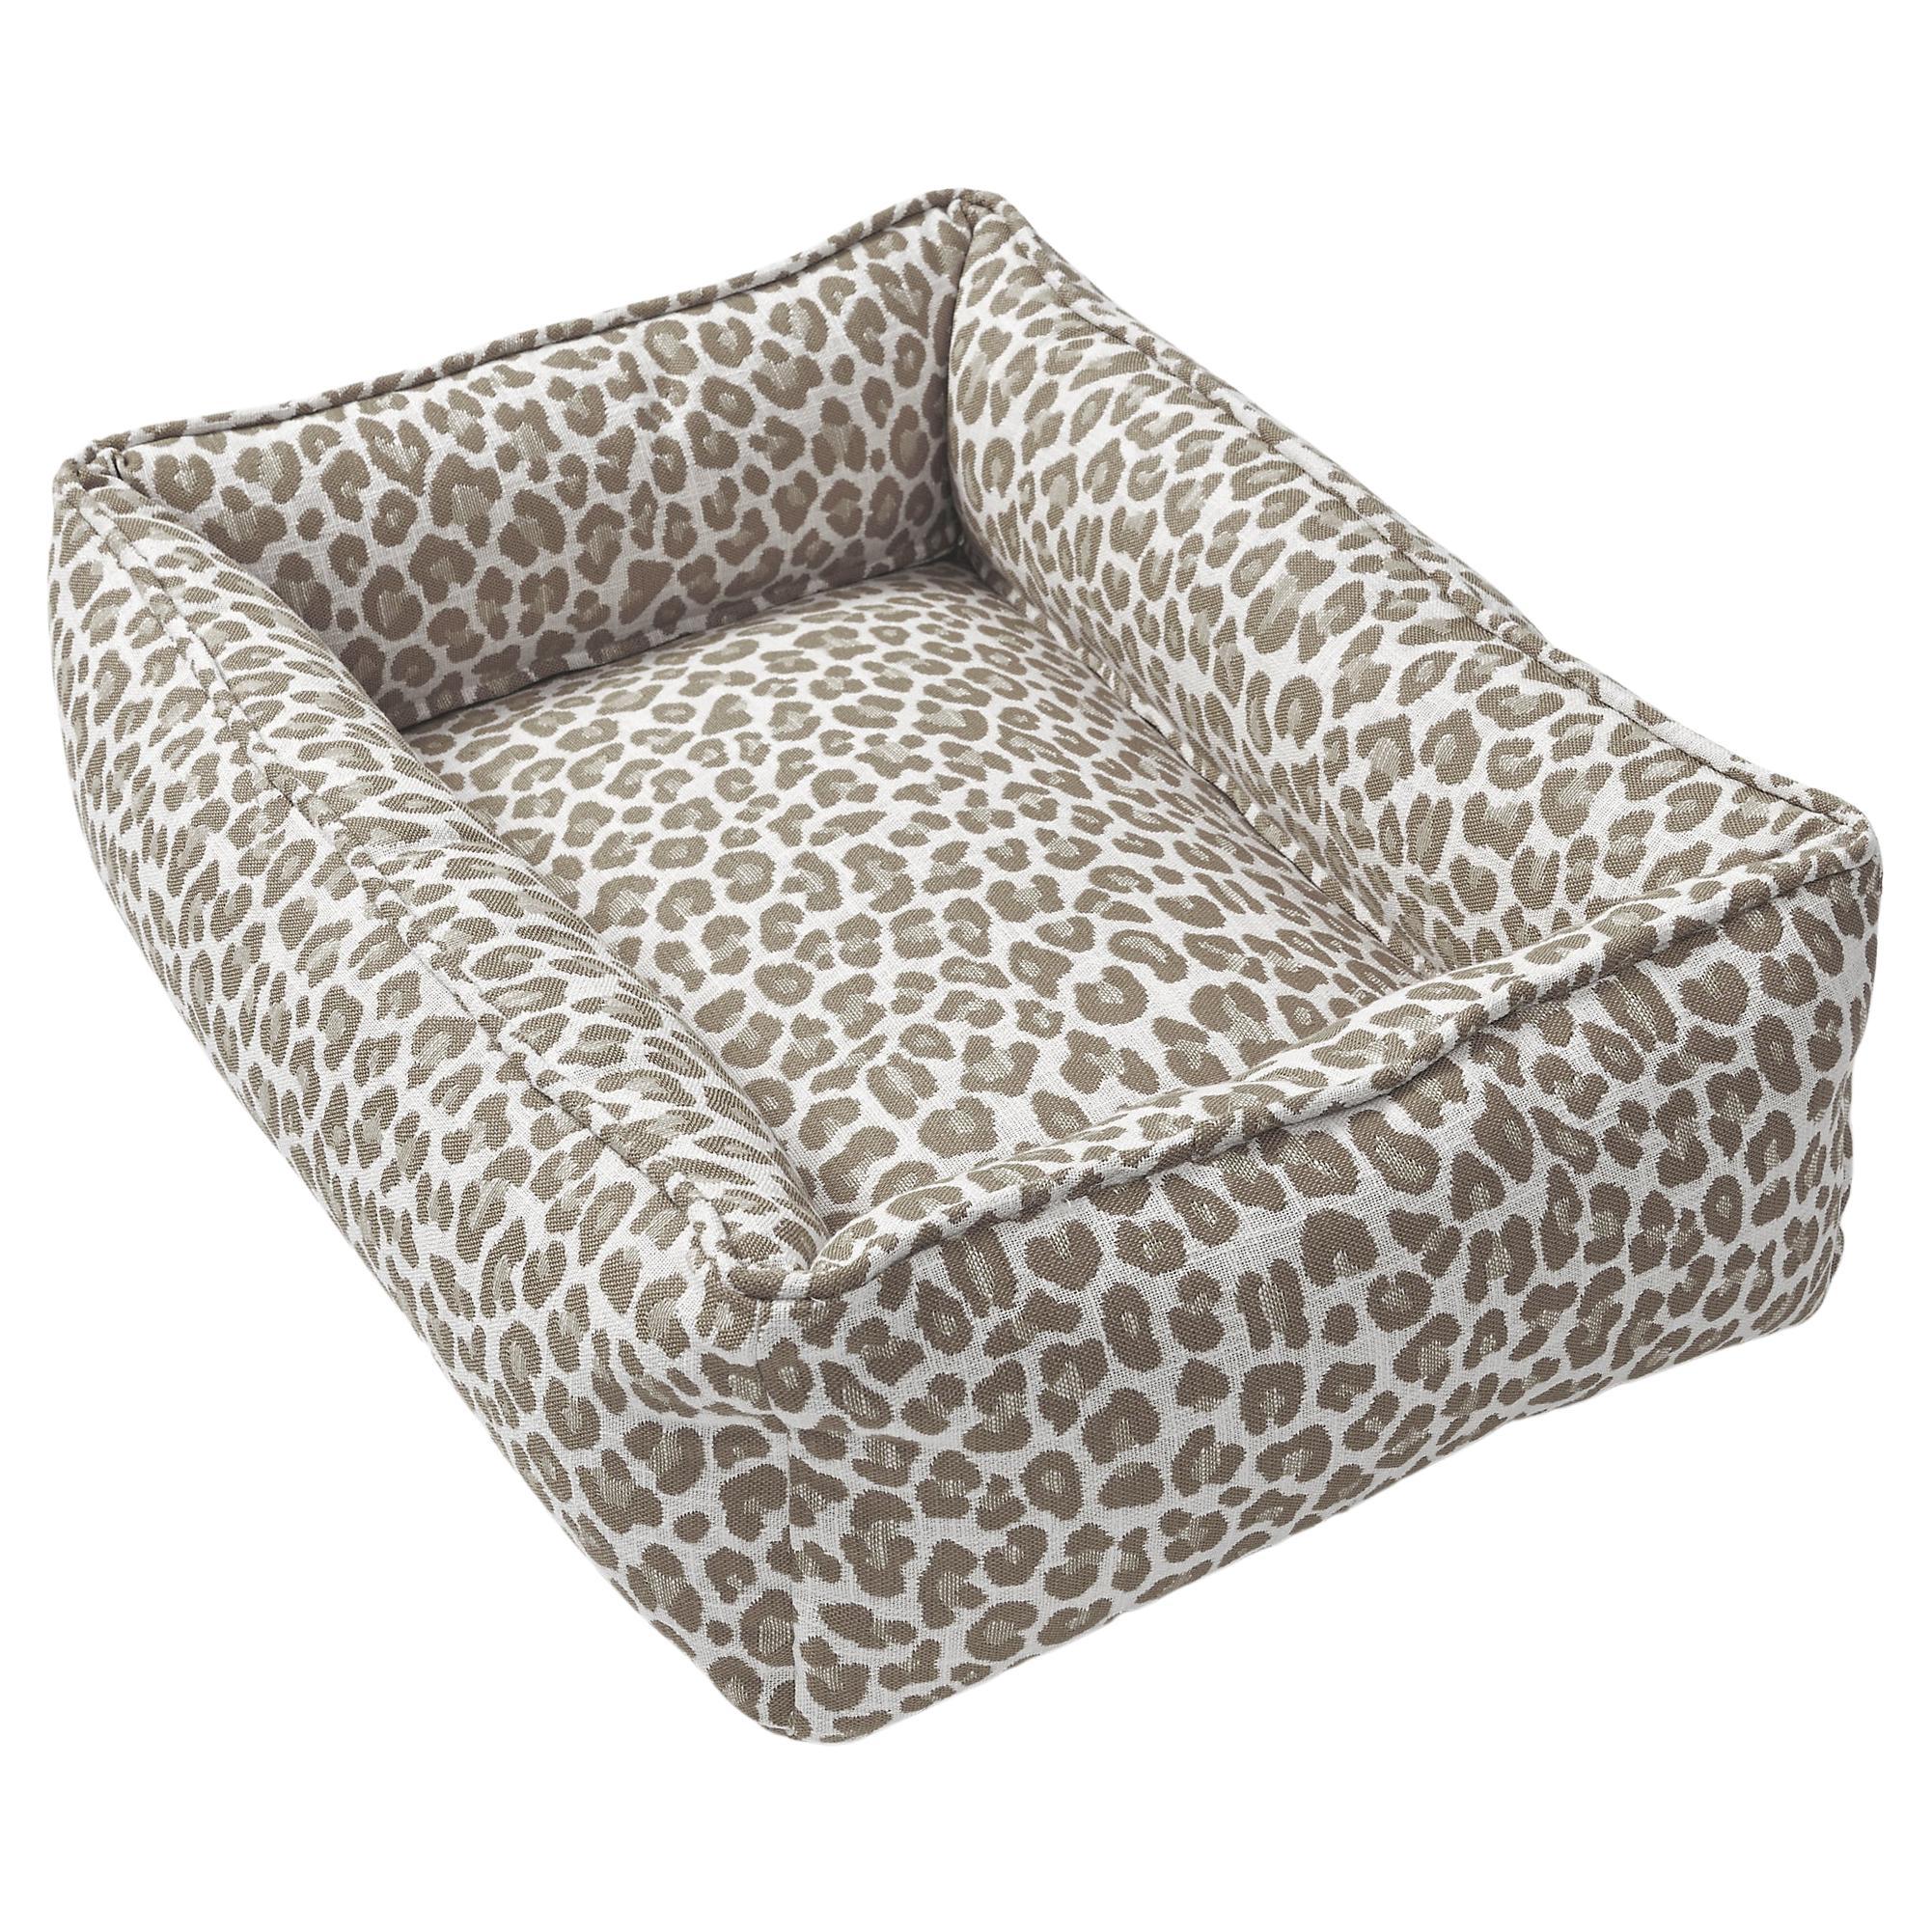 Backyard Bengal Small Dog Bed For Sale